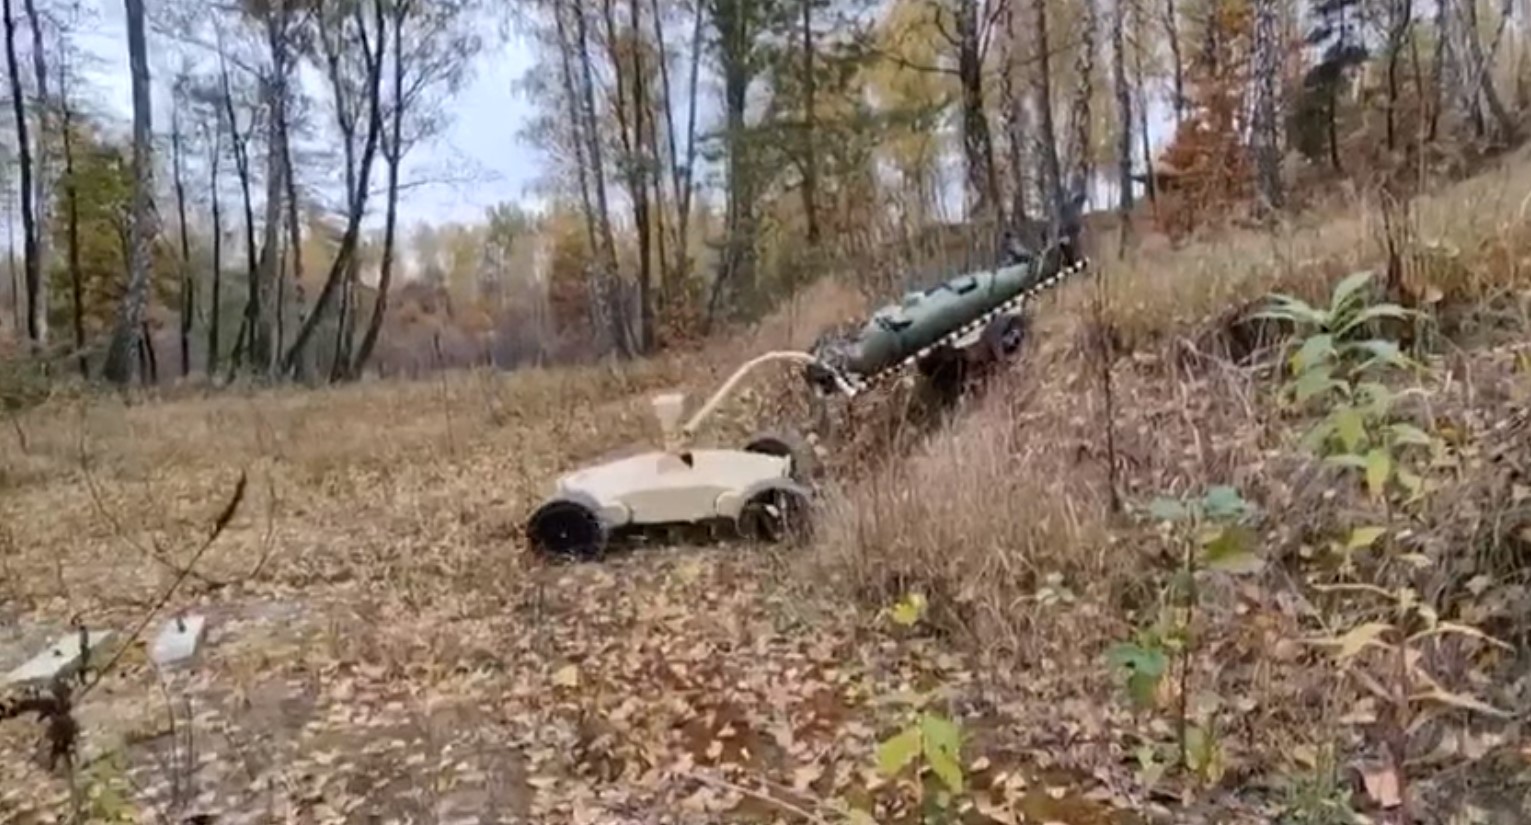 In Ukraine, a new unmanned evacuation platform is being tested